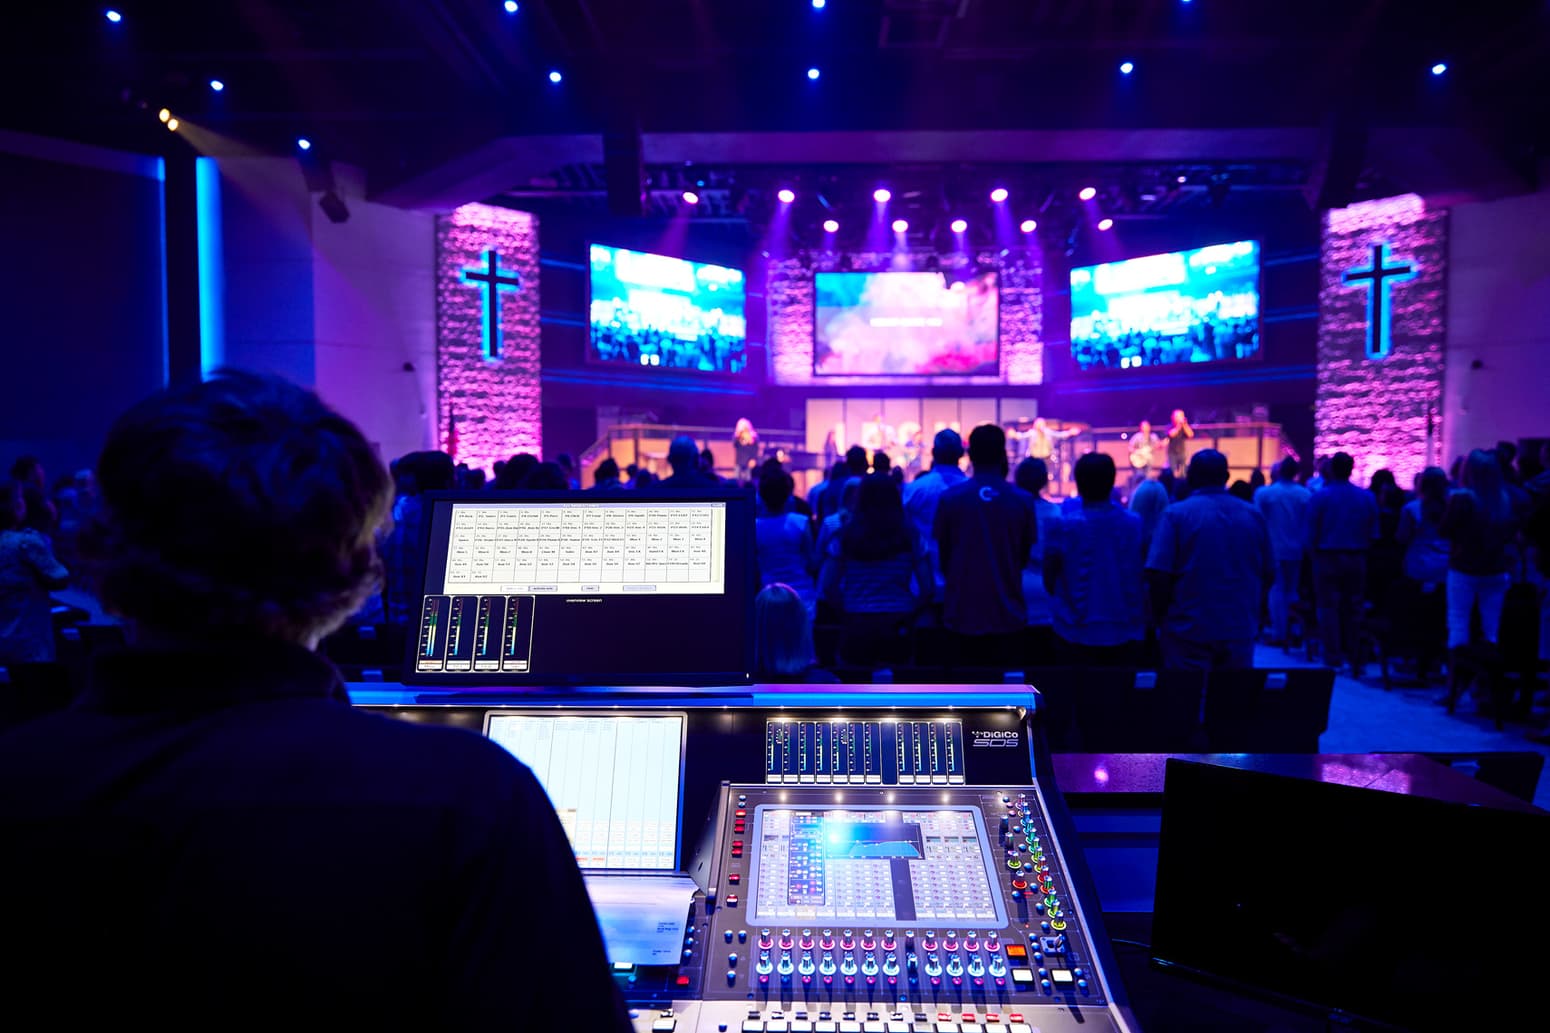 The sound system for church services at FBC includes advanced controls.